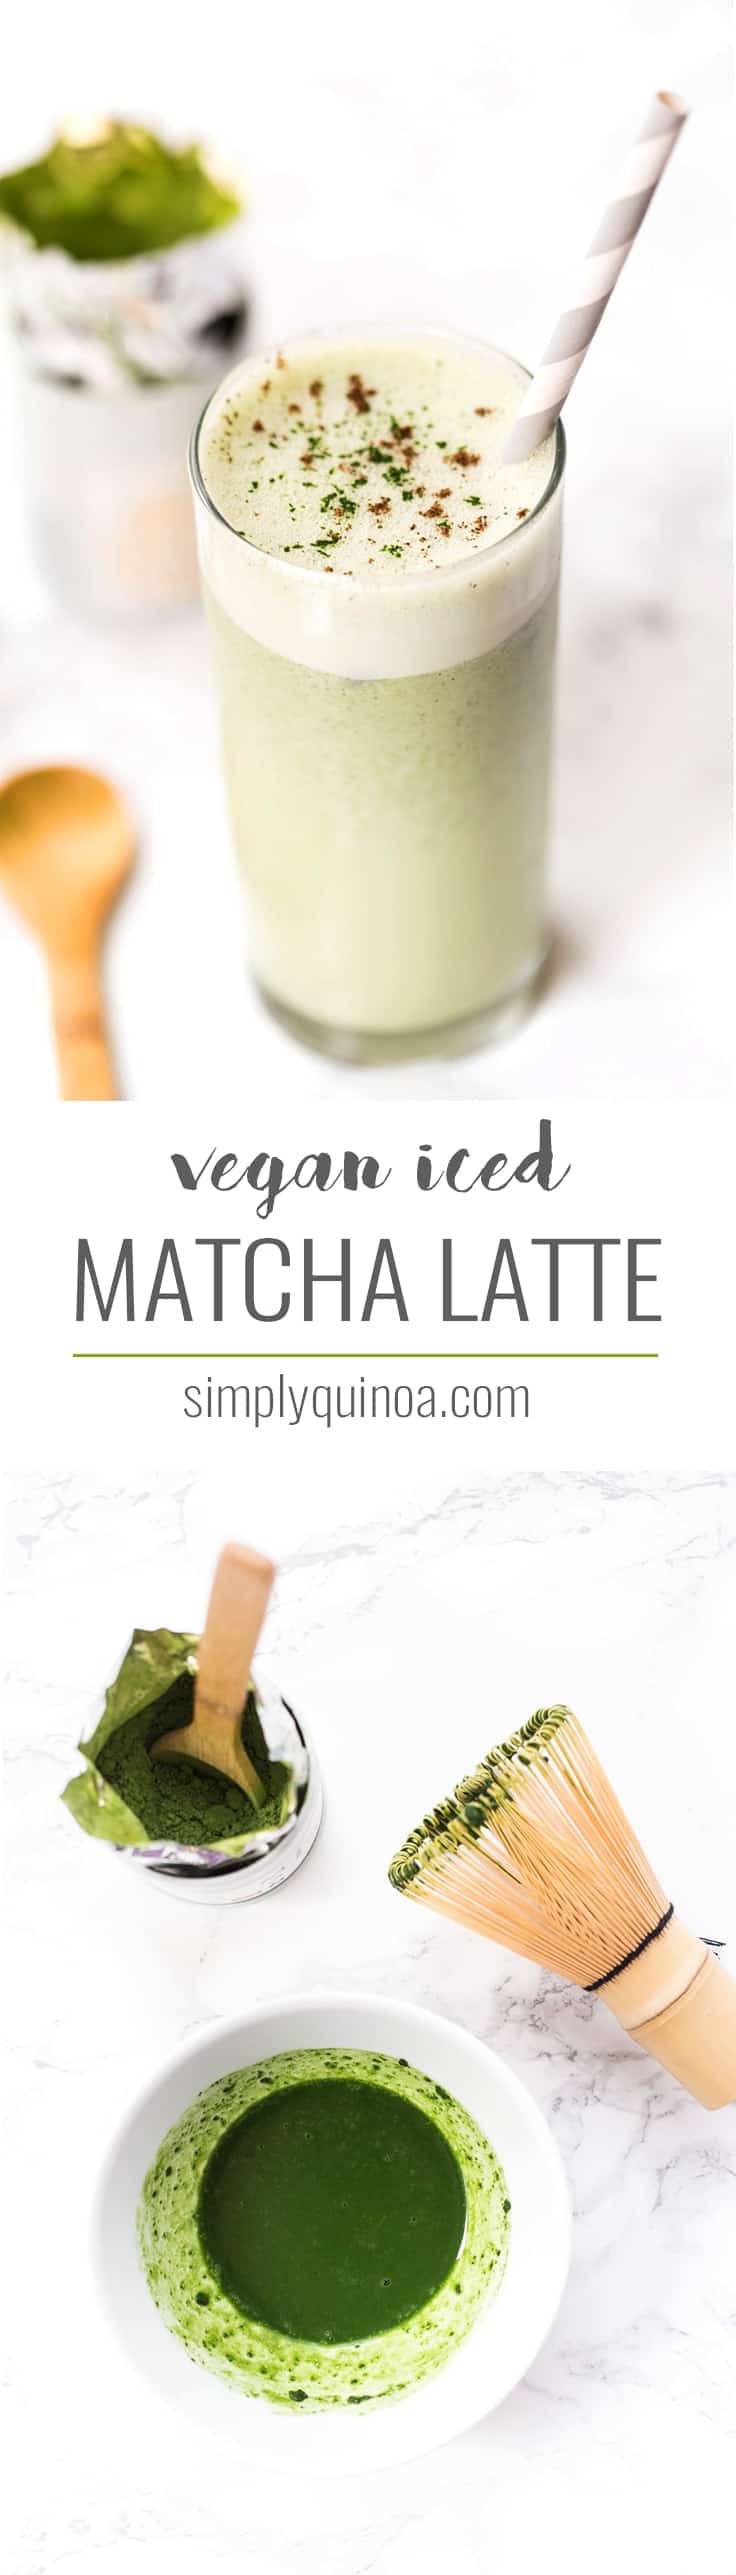 A simple ICED MATCHA LATTE made with medicinal mushrooms and coconut butter for added energy and nutrition! Naturally sweetened, vegan and gluten-free!